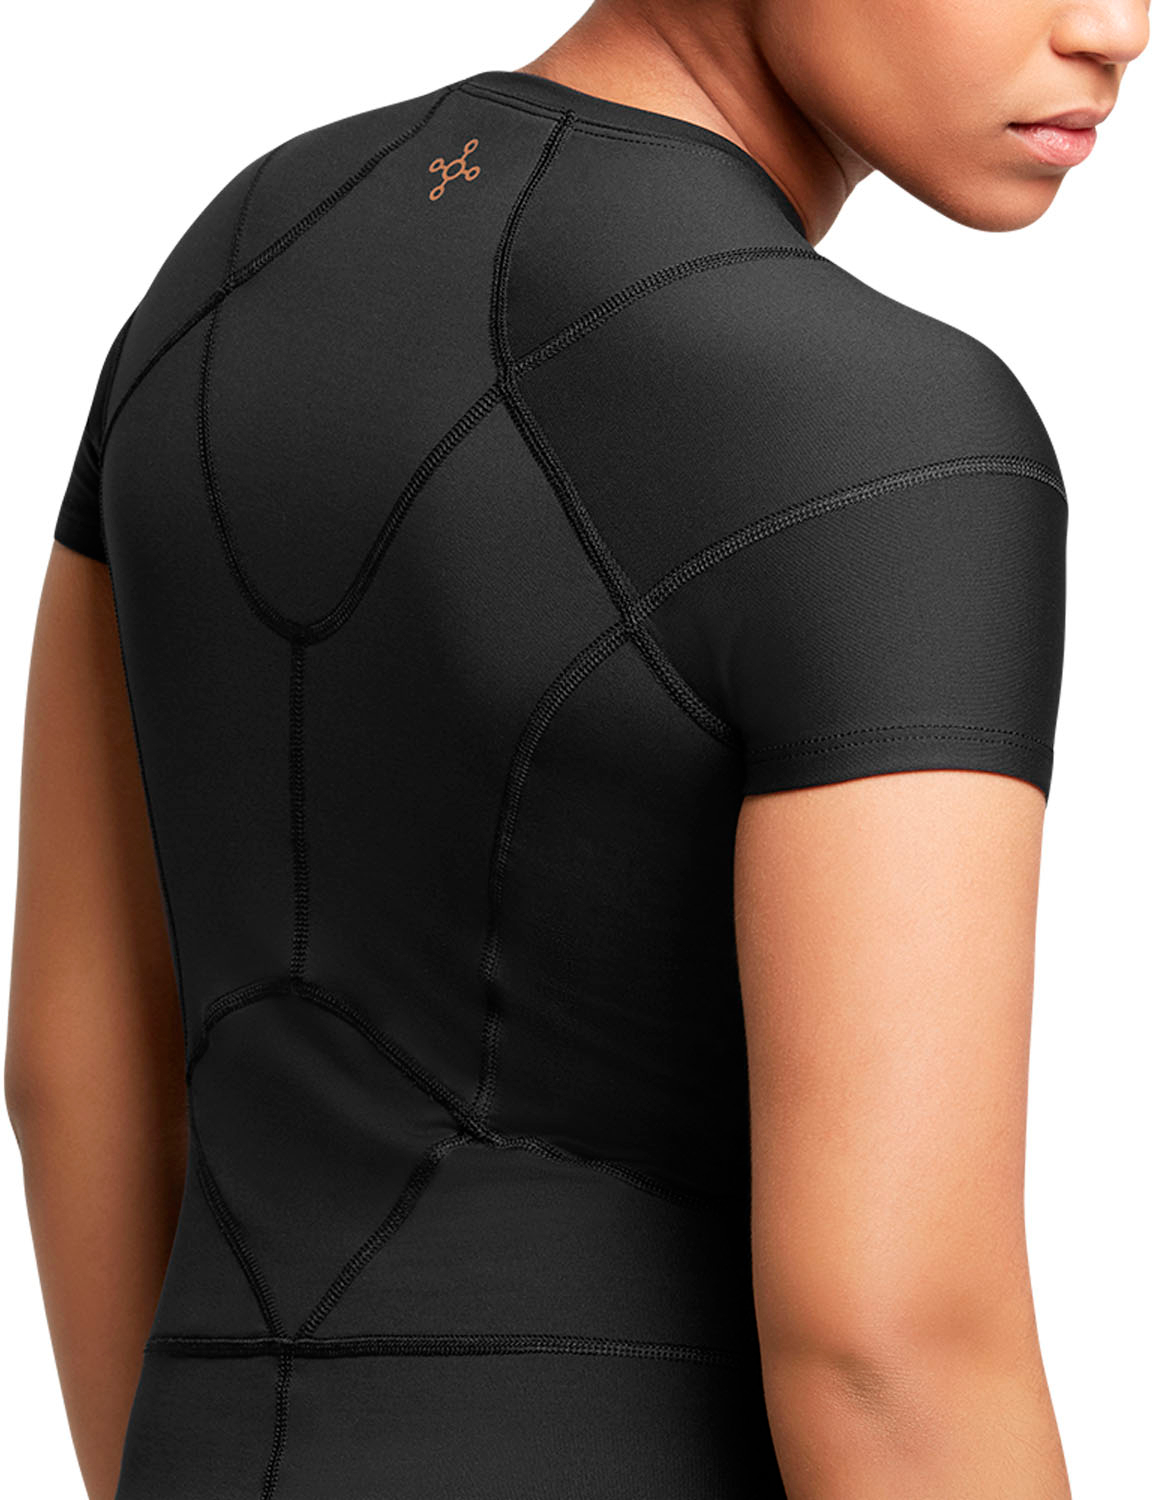  Tommie Copper Short Sleeve Mens Compression Shirt, Full Back  Support Shirt, Shoulder & Posture, Black, Small : Clothing, Shoes & Jewelry